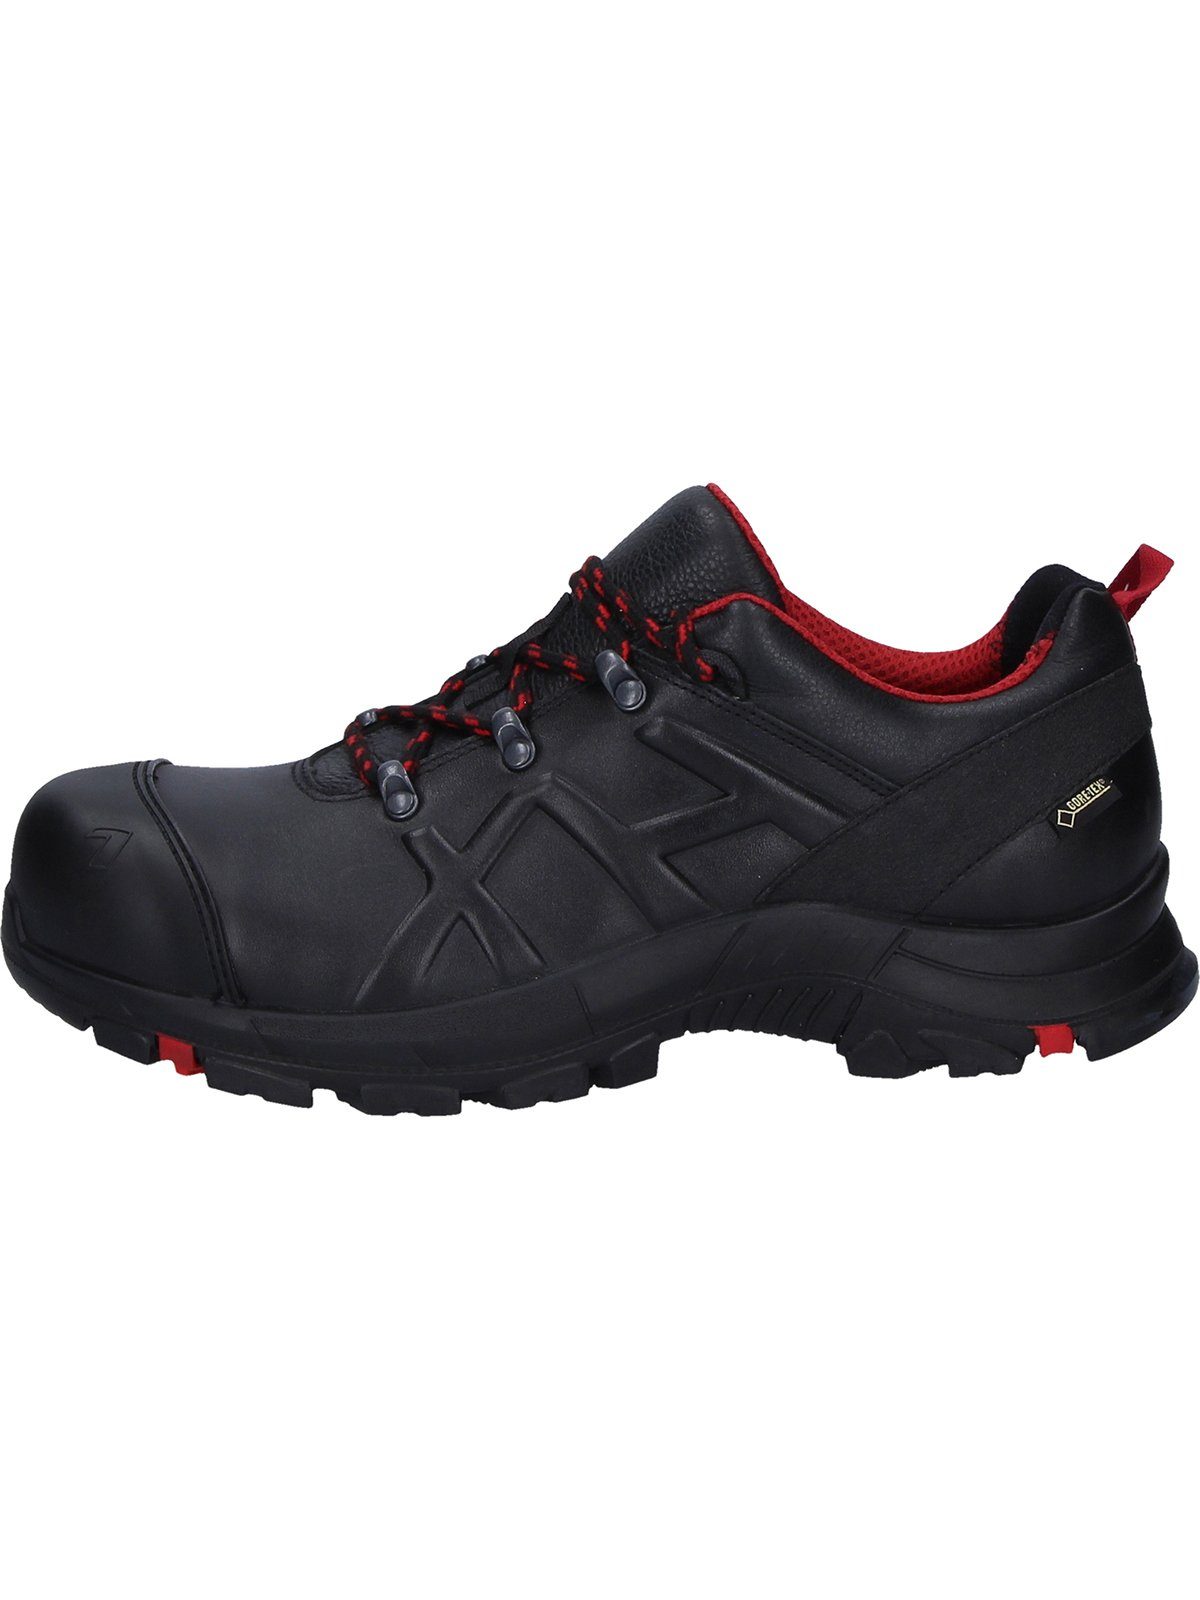 haix Black Eagle Safety low black/red Arbeitsschuh 54